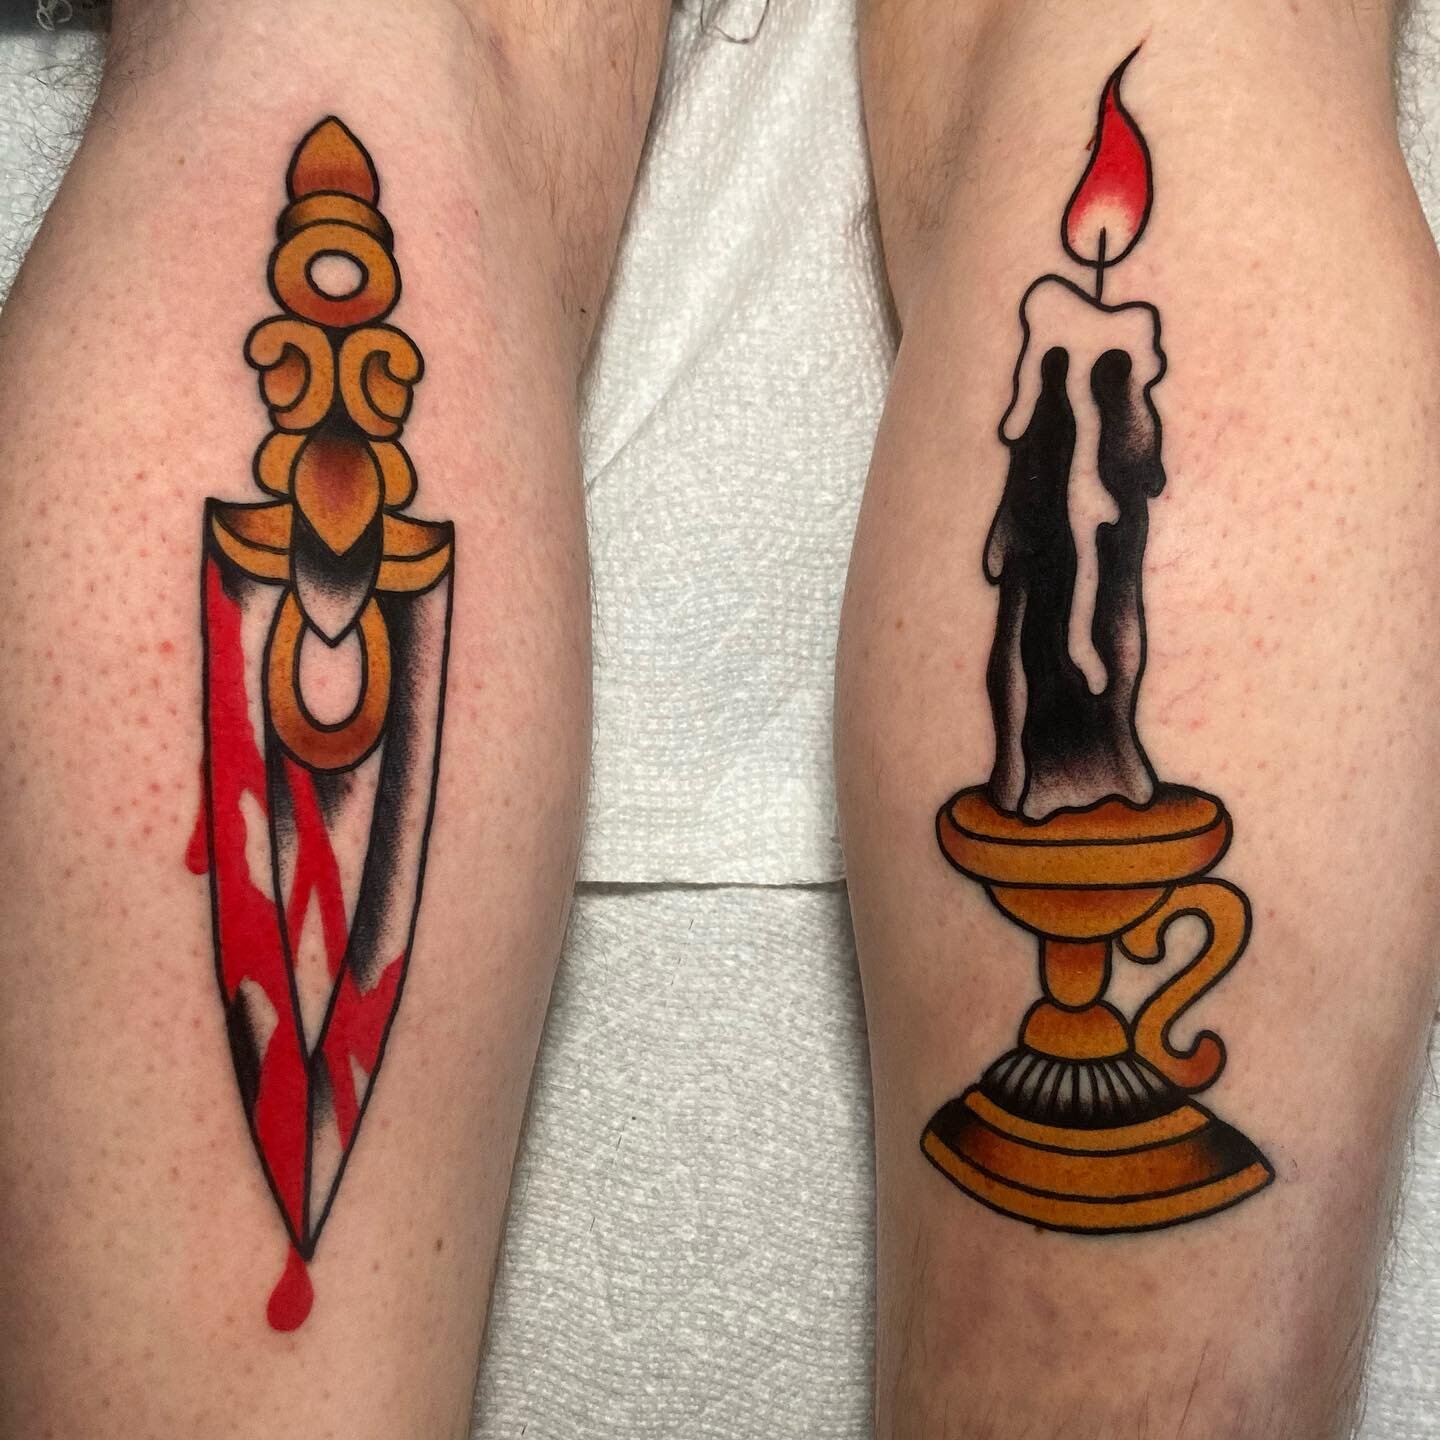 Sacrificial alter props, thanks Steve! @hotlinetattoo 

**************************************
To get on my waitlist, click the link in my Bio. If you're looking for something small, or a walk-in tattoo, feel free to call the shop at
508-827-7911 to 